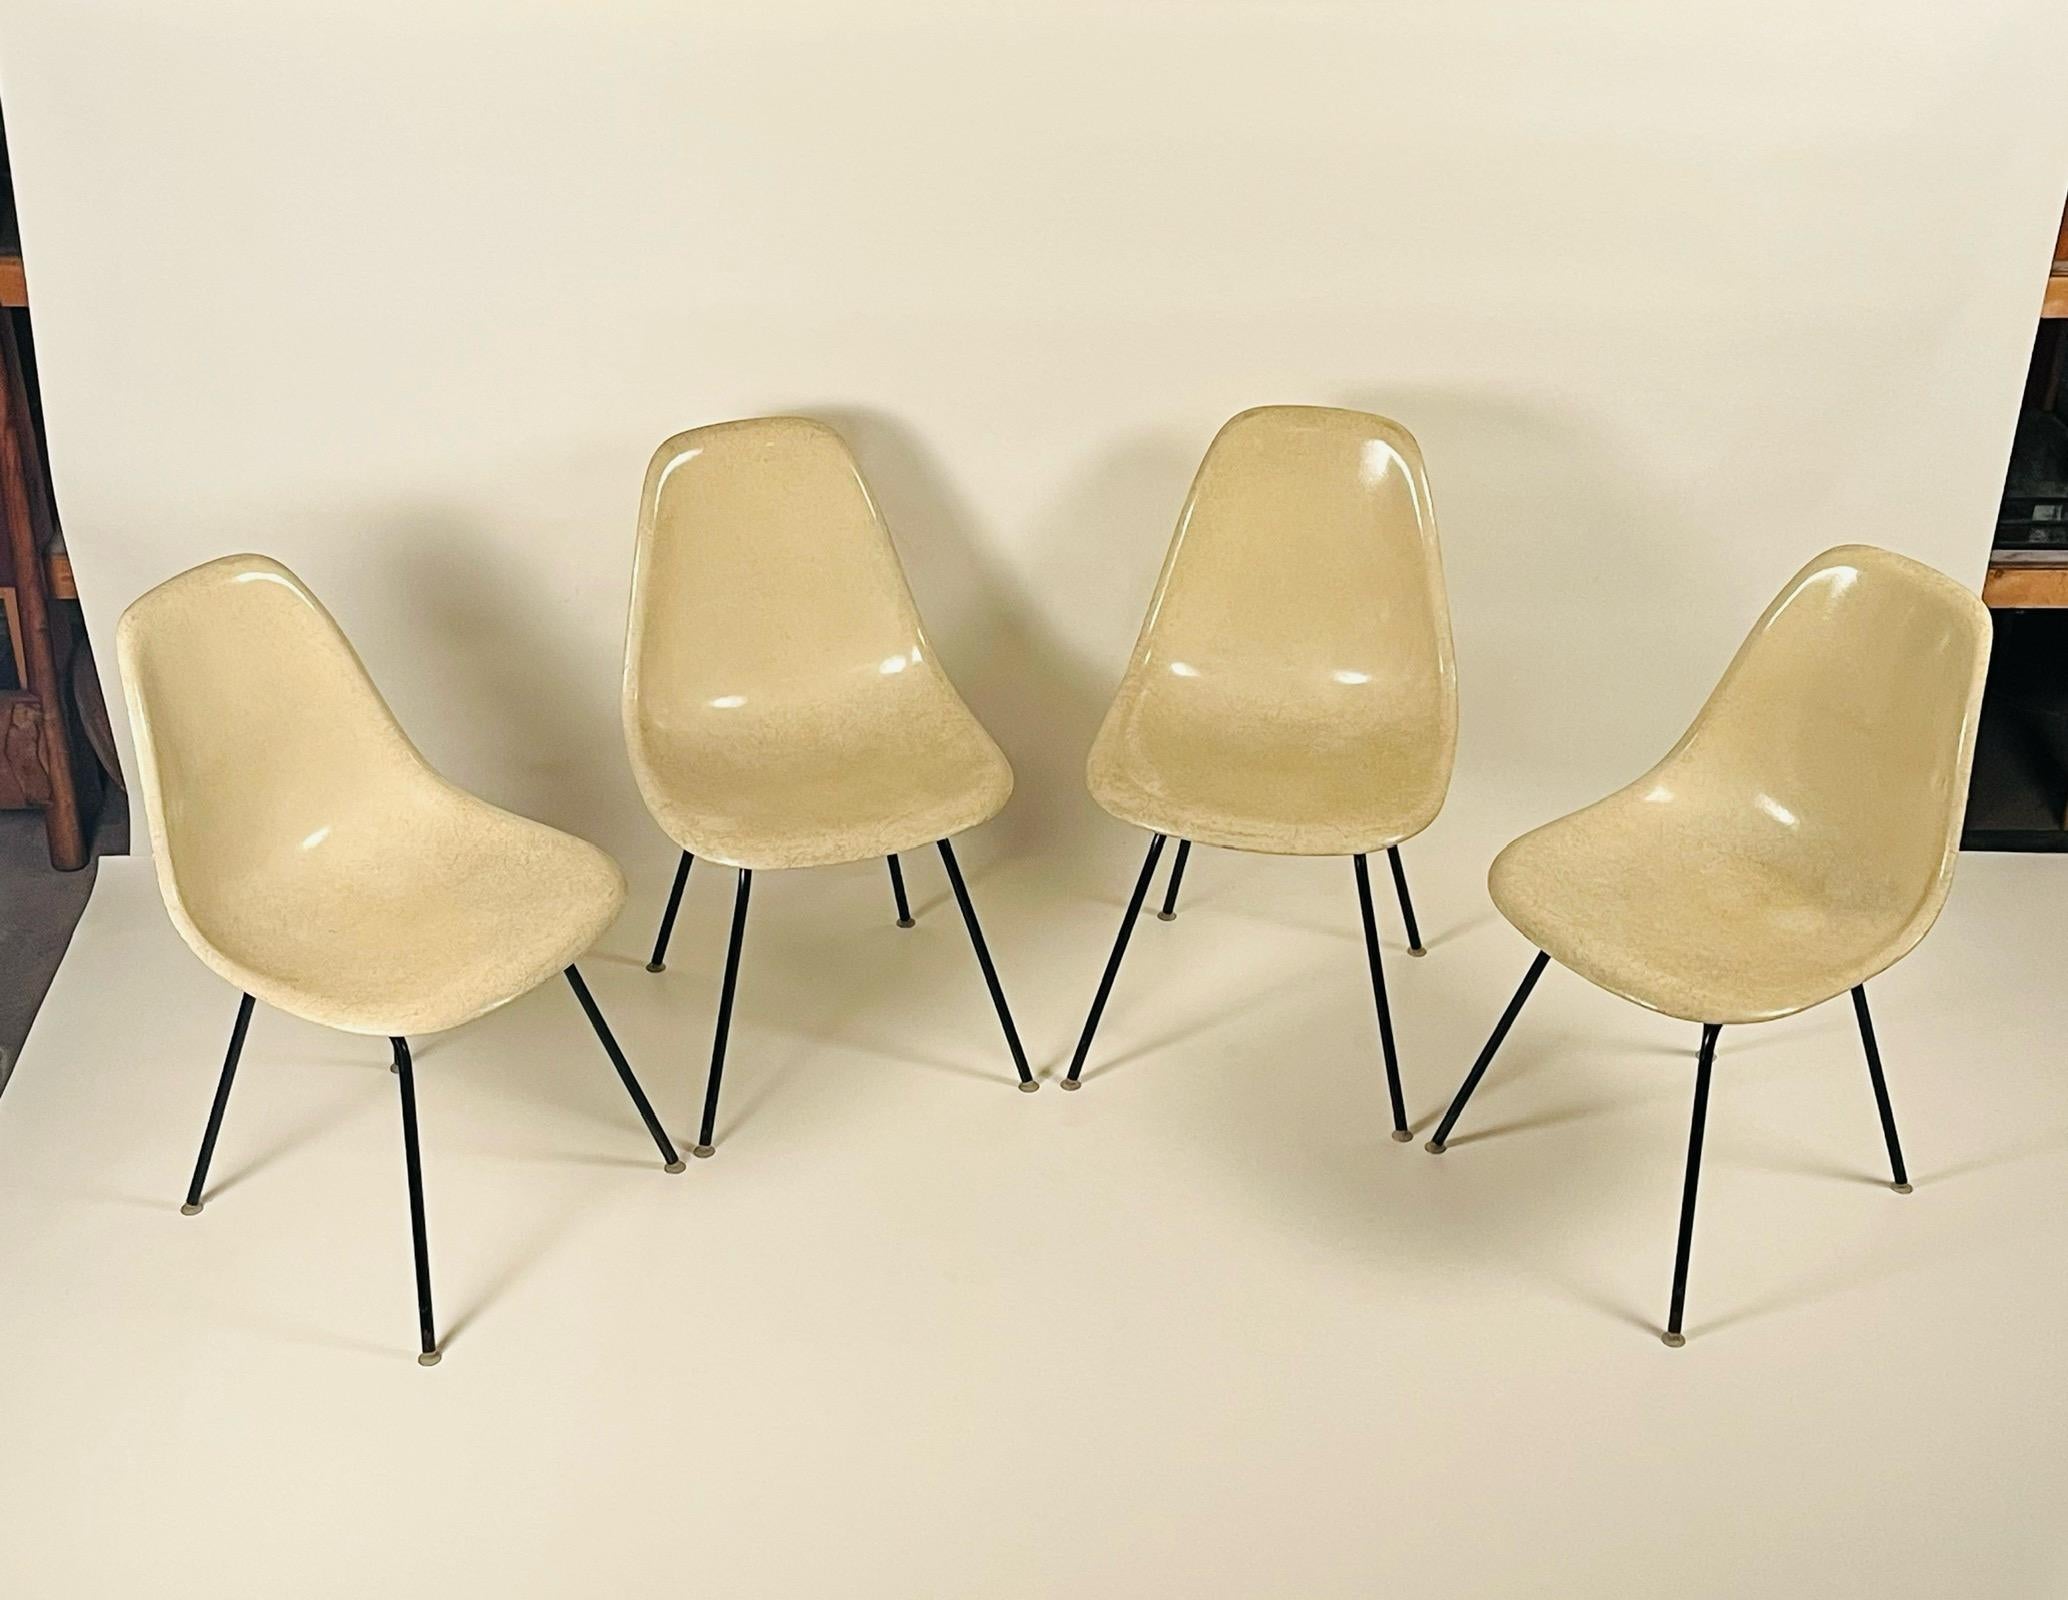 Mid-20th Century Set of 4 Vintage White Fiberglass Eames Chairs by Herman Miller For Sale